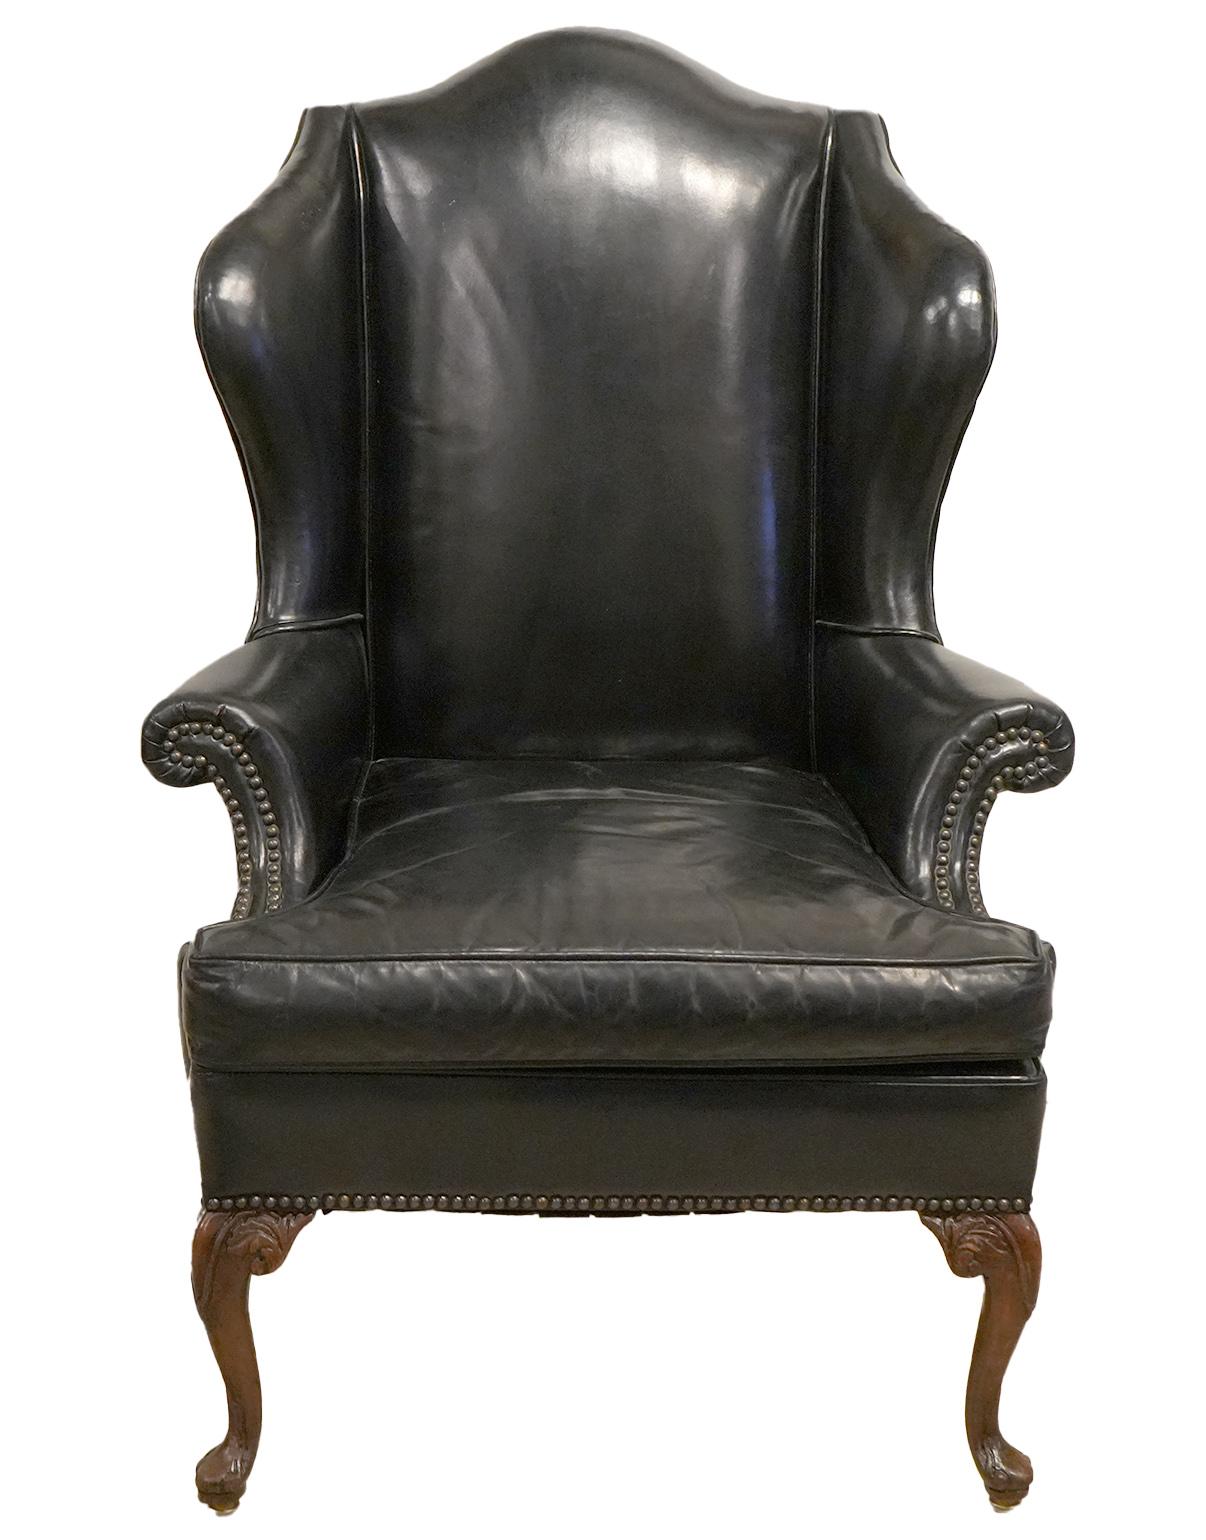 Resting on carved cabriole shaped front legs and sabre style rear legs the sculptural quality of this Queen Anne style wing back chair looks inviting be it for reading a book, watching a game or taking a brake in the office. The camel back, the